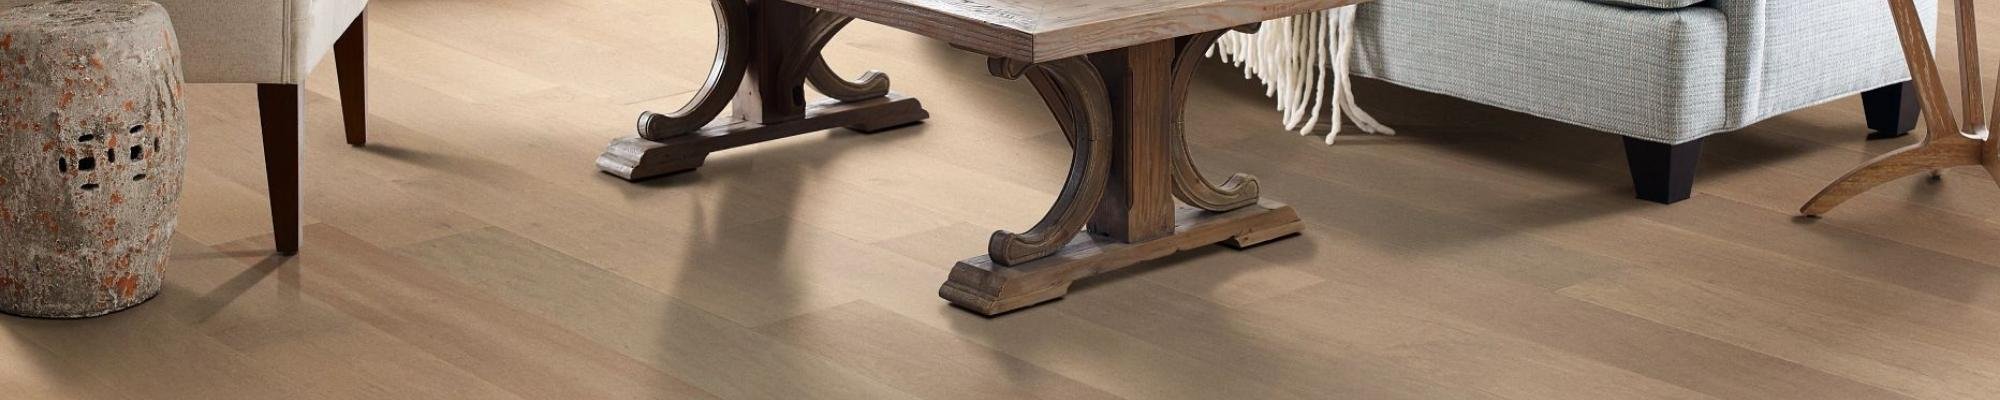 furniture on hardwood floor - House of Carpets Inc. in North Chesterfield